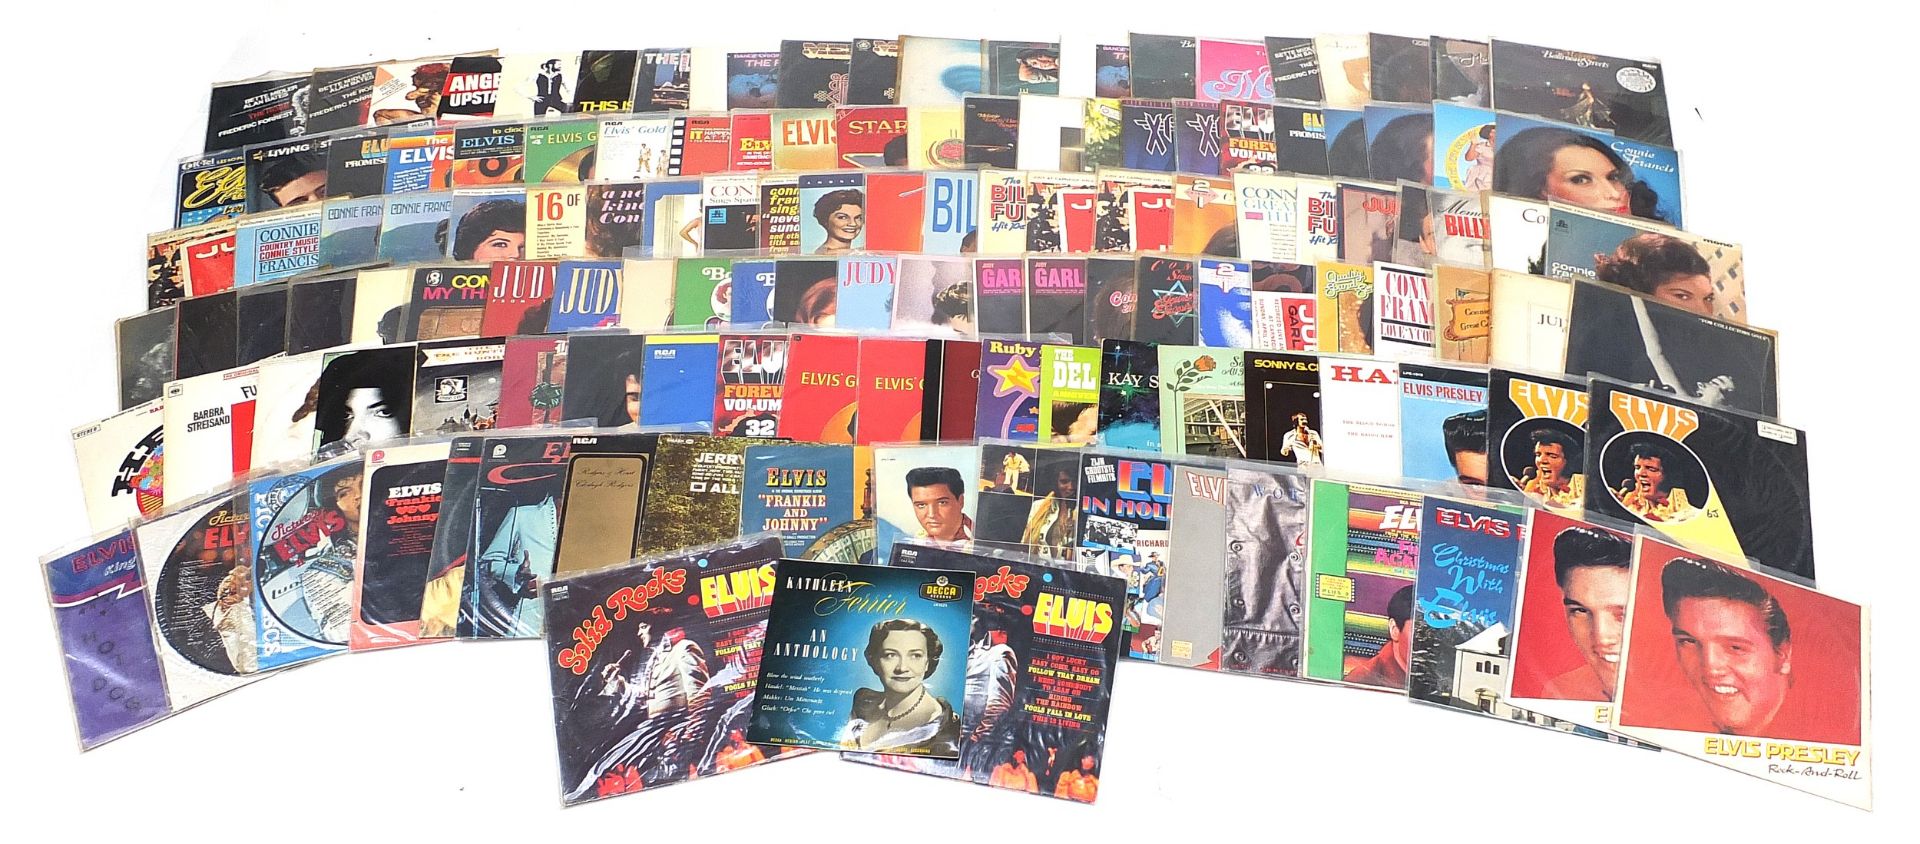 Vinyl LP records including The Damned, Fleetwood Mac, Melanie, Elvis Presley and Connie Francis